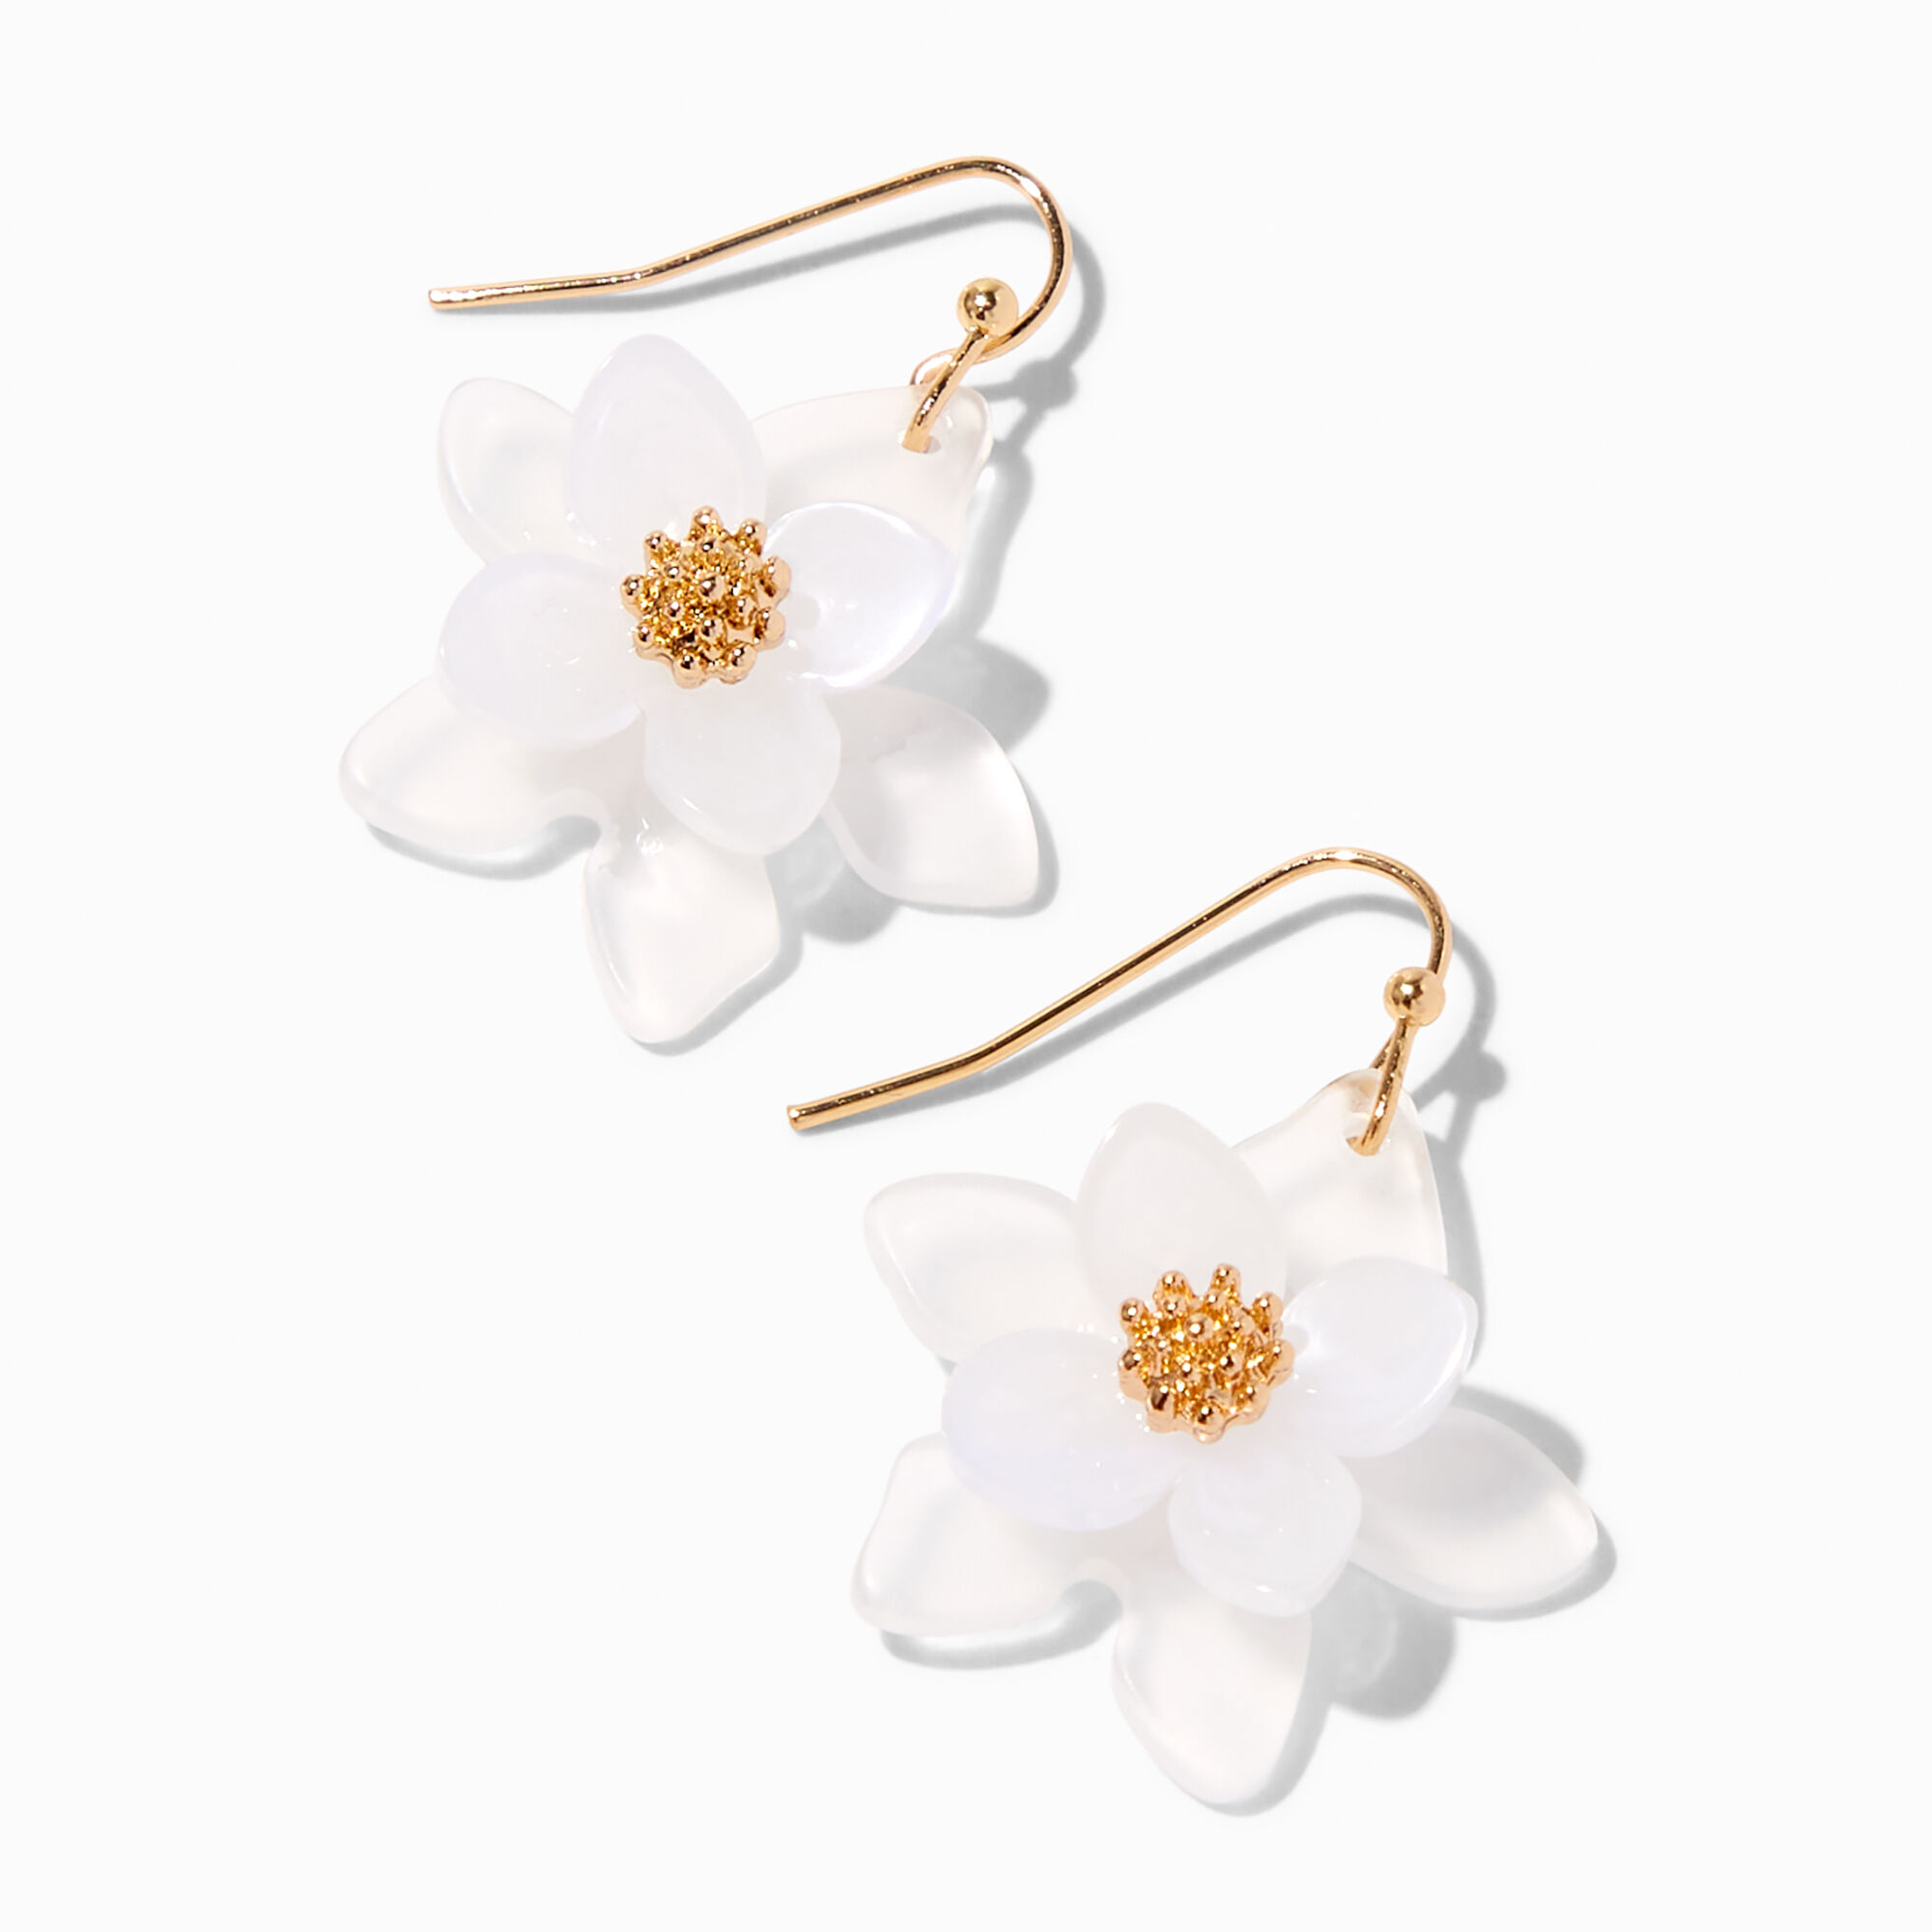 View Claires Flower 1 Gold Drop Earrings White information